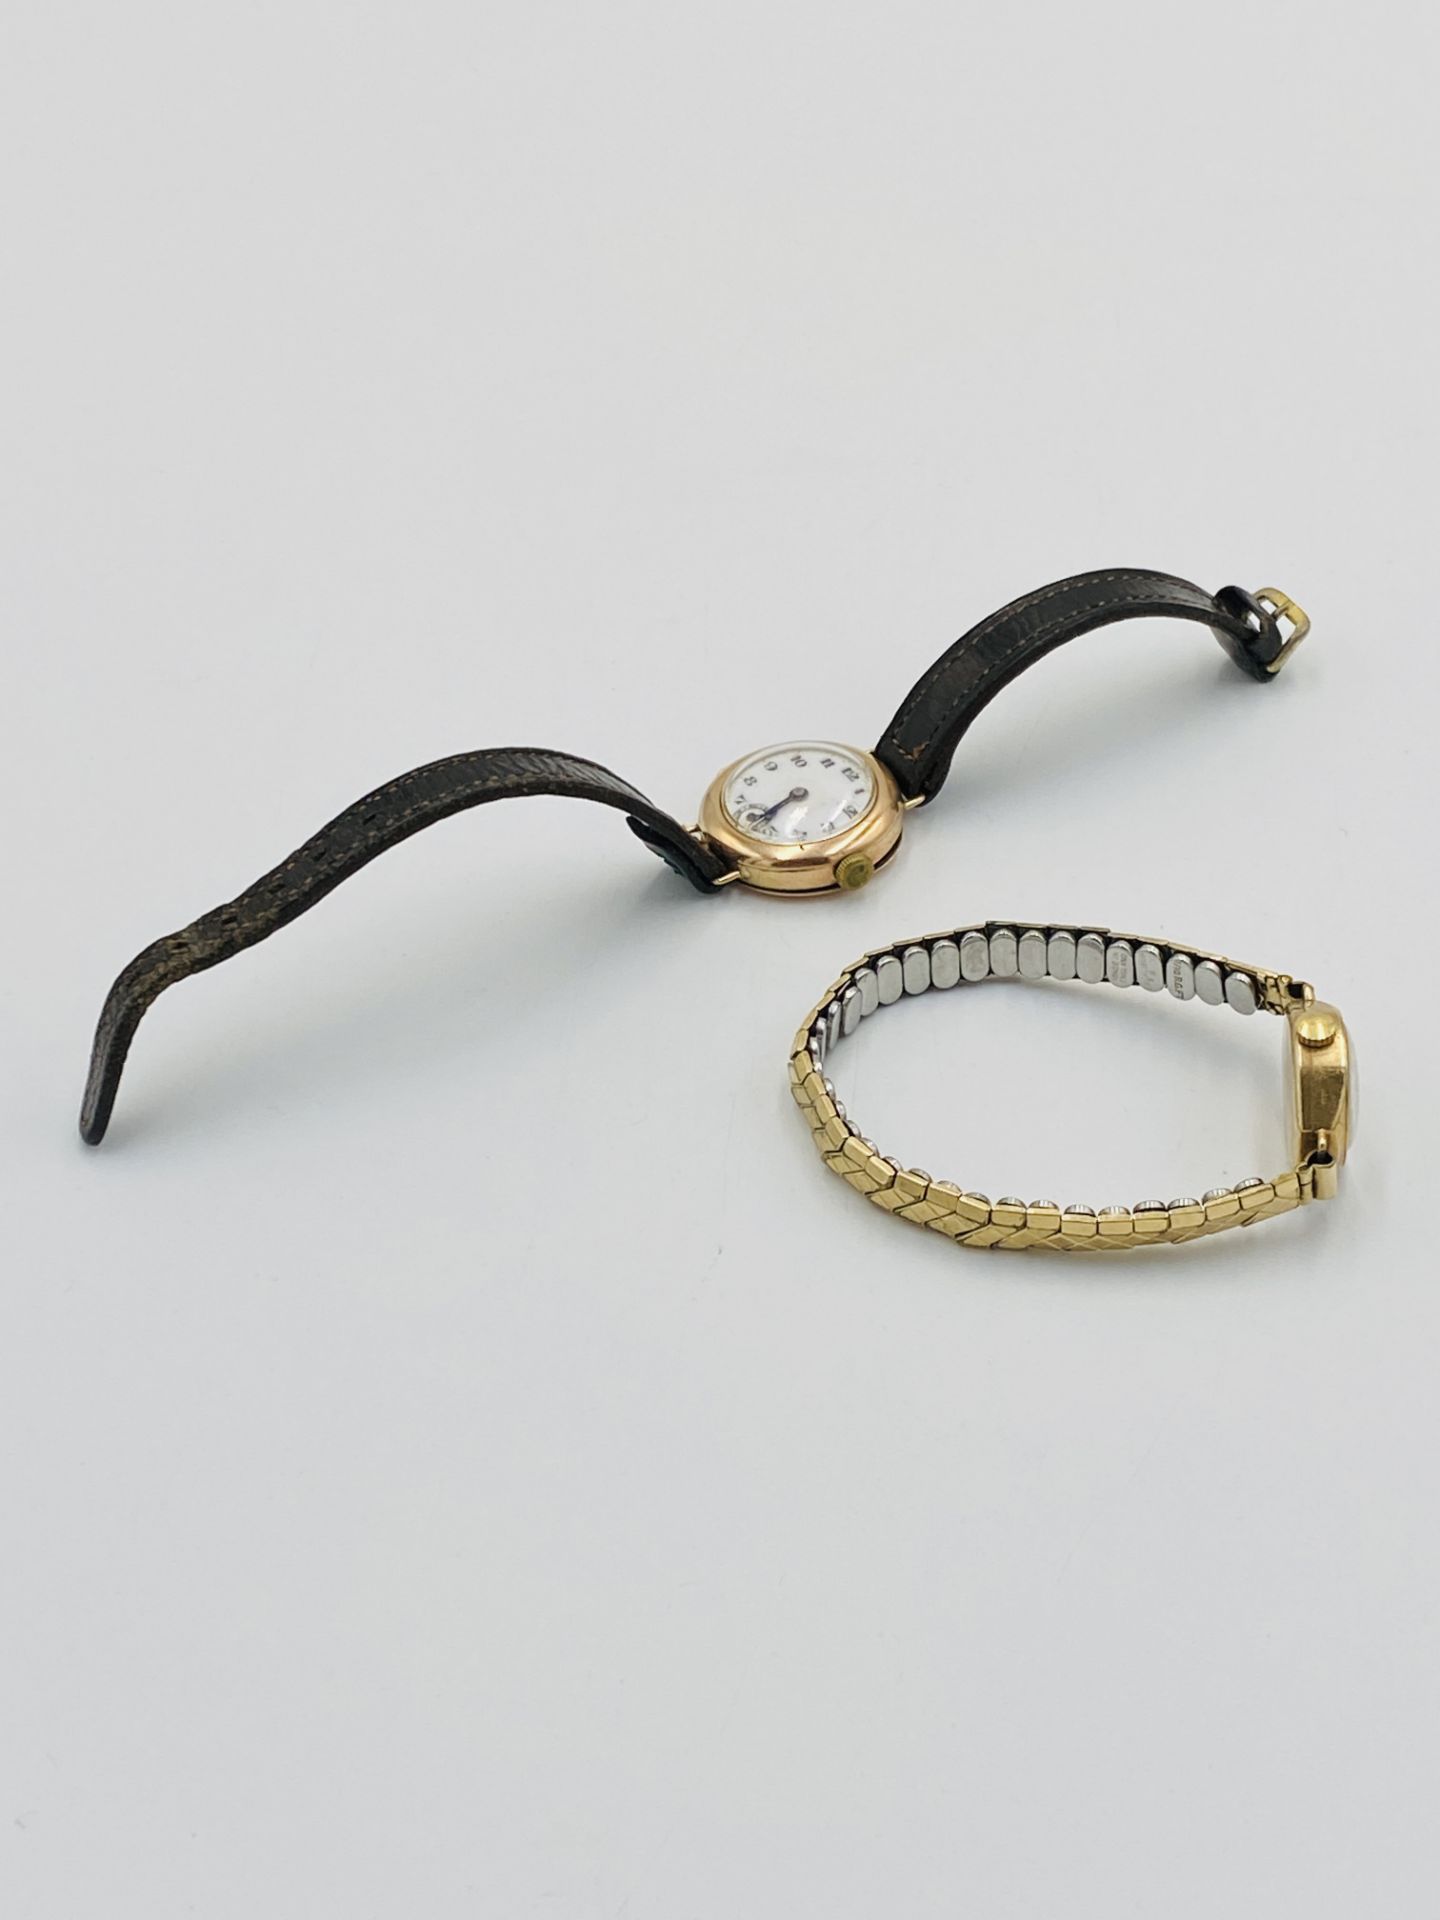 Two ladies wristwatches in 9ct gold cases - Image 5 of 7